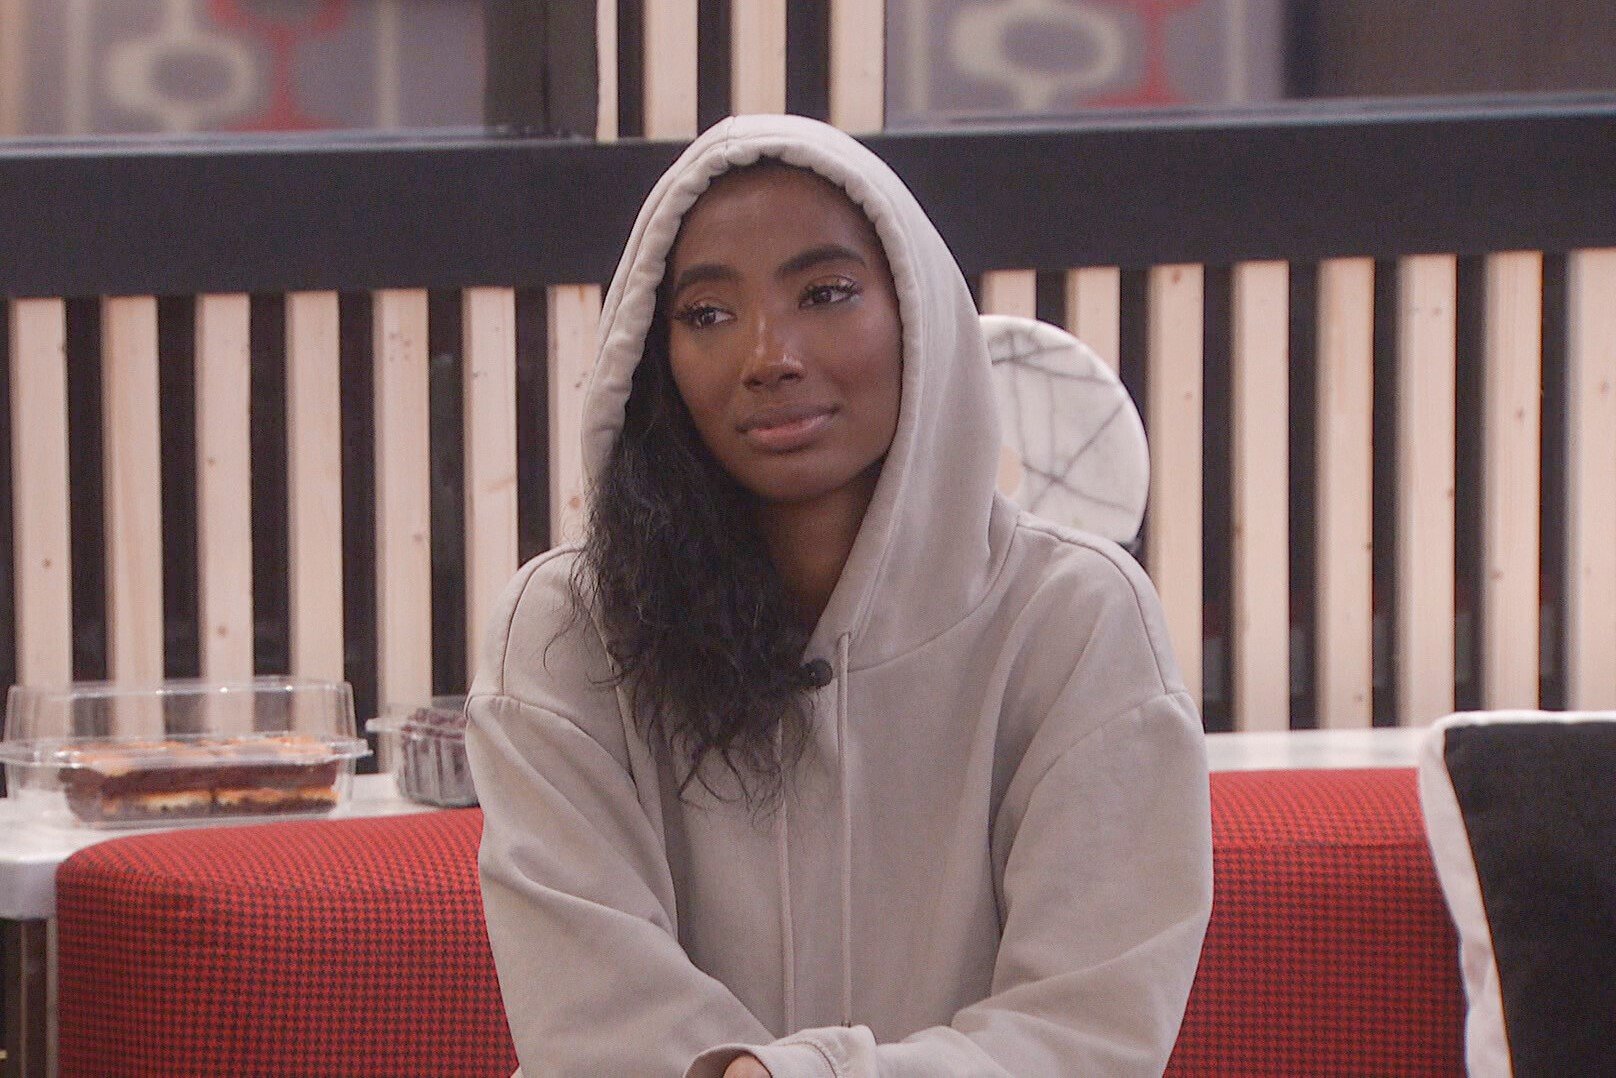 Taylor Hale, who stars in 'Big Brother 24' on CBS, wears a light gray hoodie.